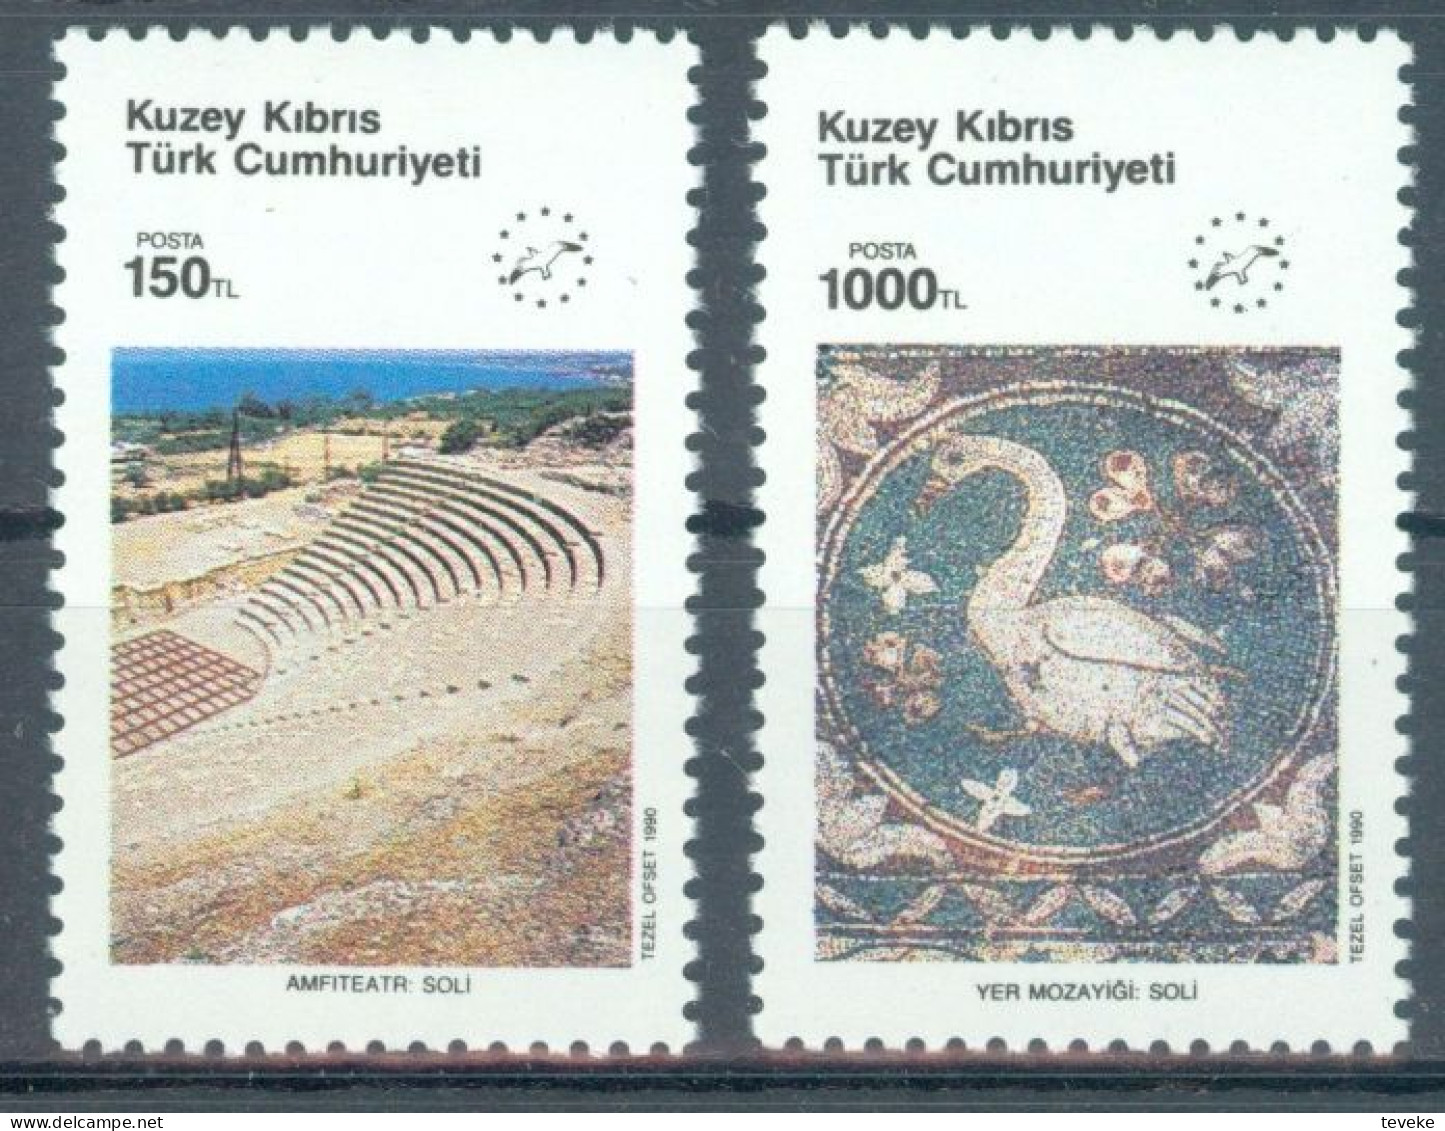 TURKISH CYPRUS 1990 - Michel Nr. 283/284 - MNH ** - European Year Of Tourism - Unused Stamps